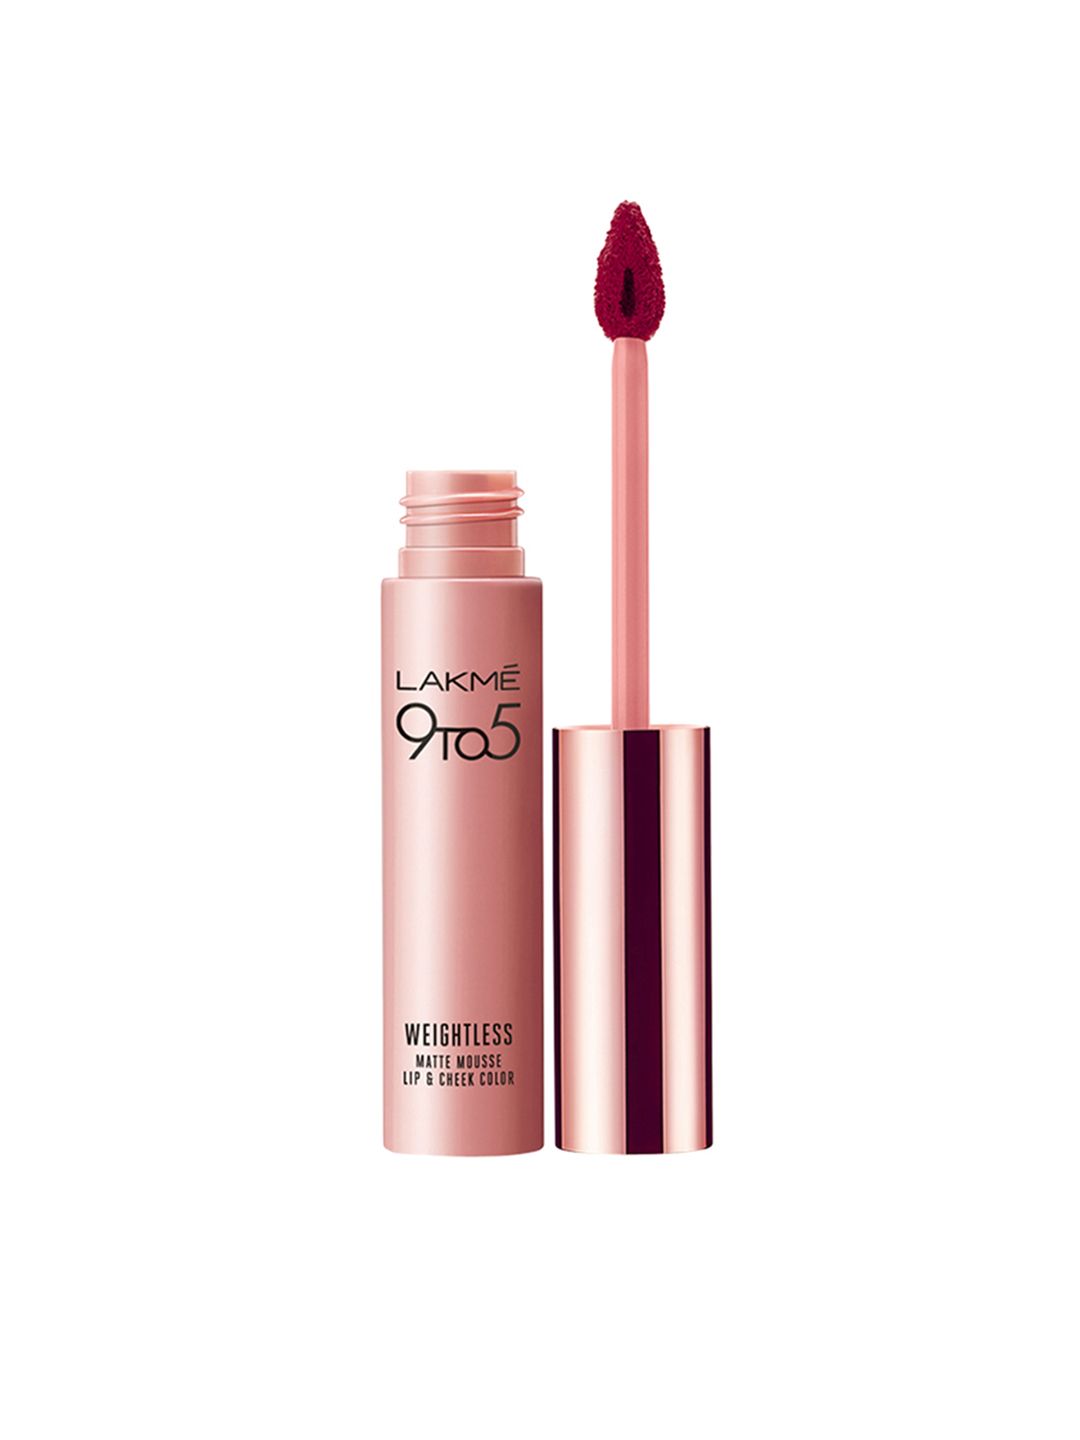 Lakme 9 to 5 Weightless Lip & Cheek Color - Rosy Plum Price in India